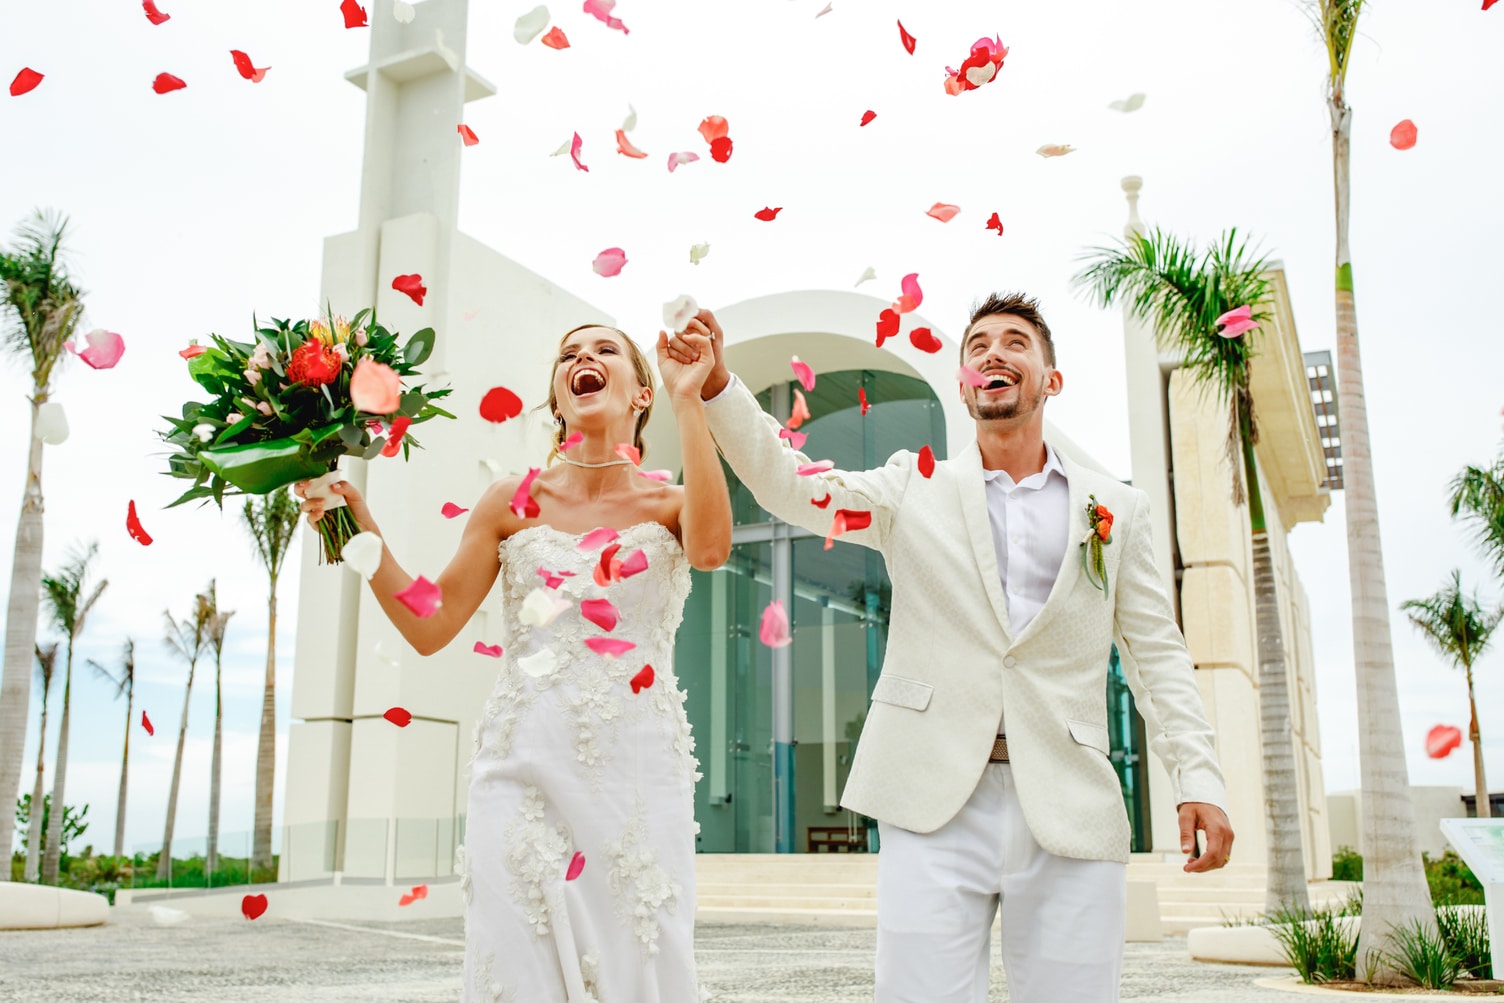 Destination wedding couple leaving church in Mexico while showered with rose petals